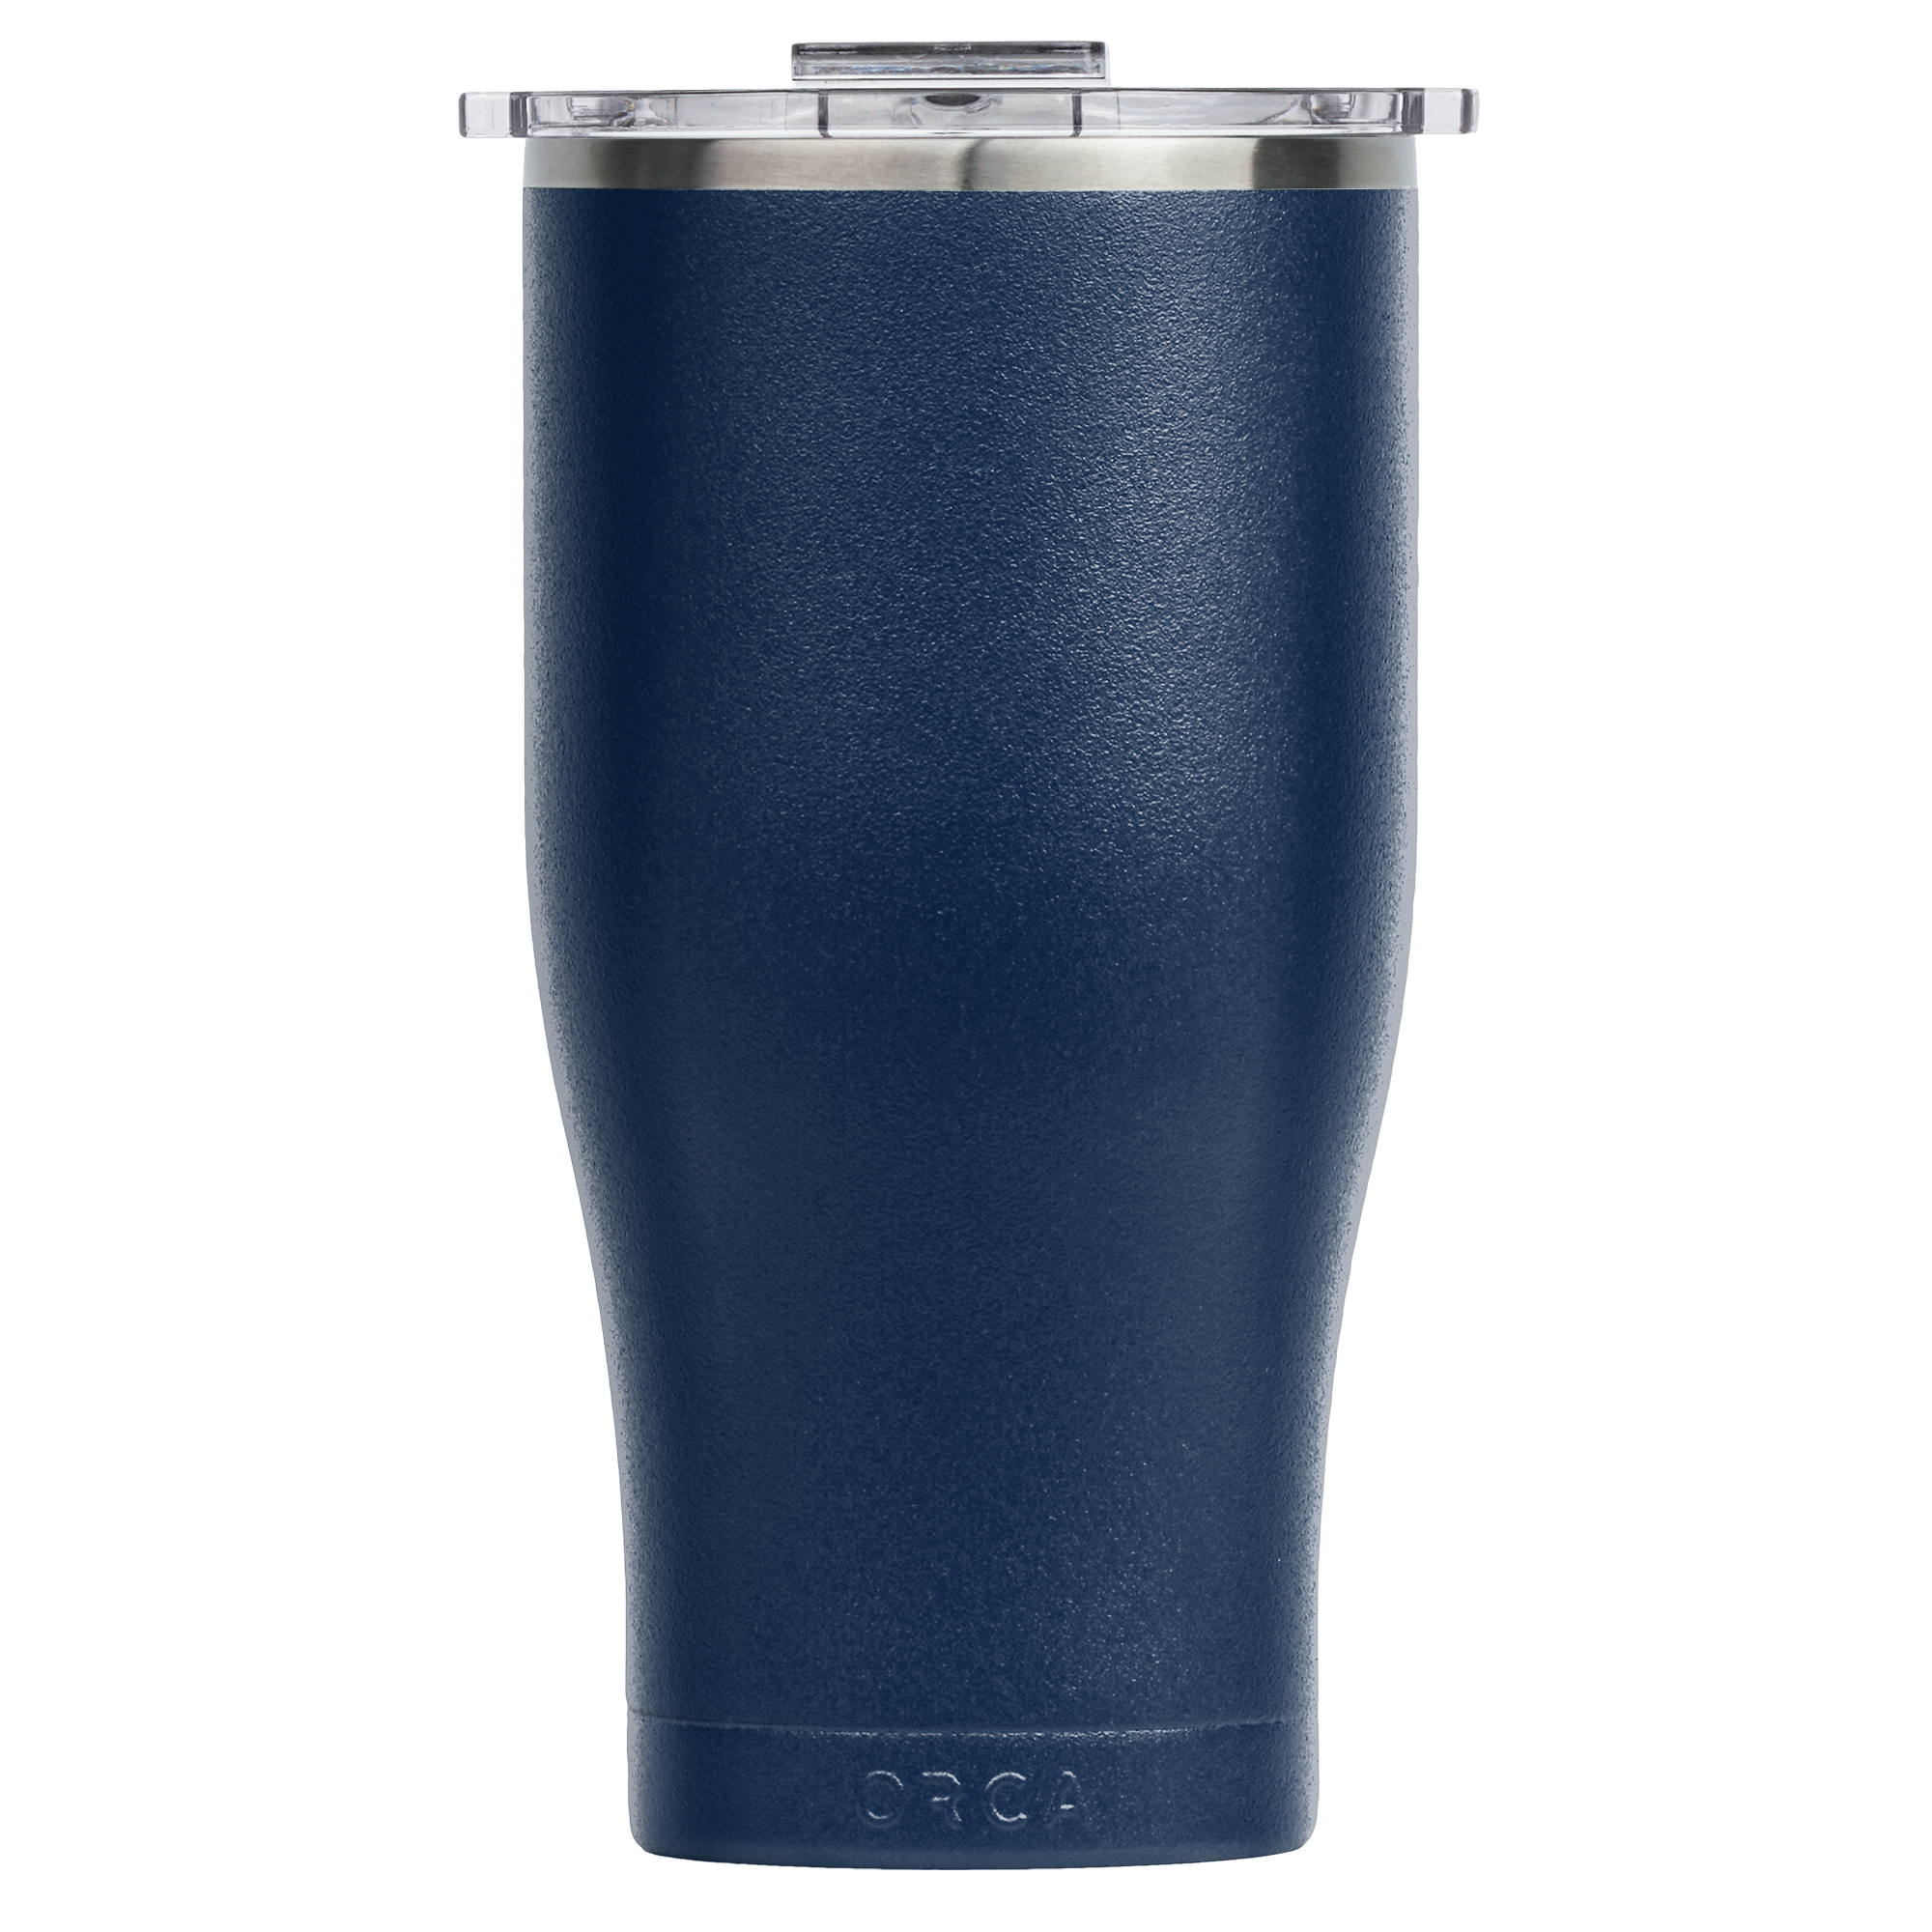 ORCA Coolers Chaser Tumbler Stainless Steel Cup 27oz